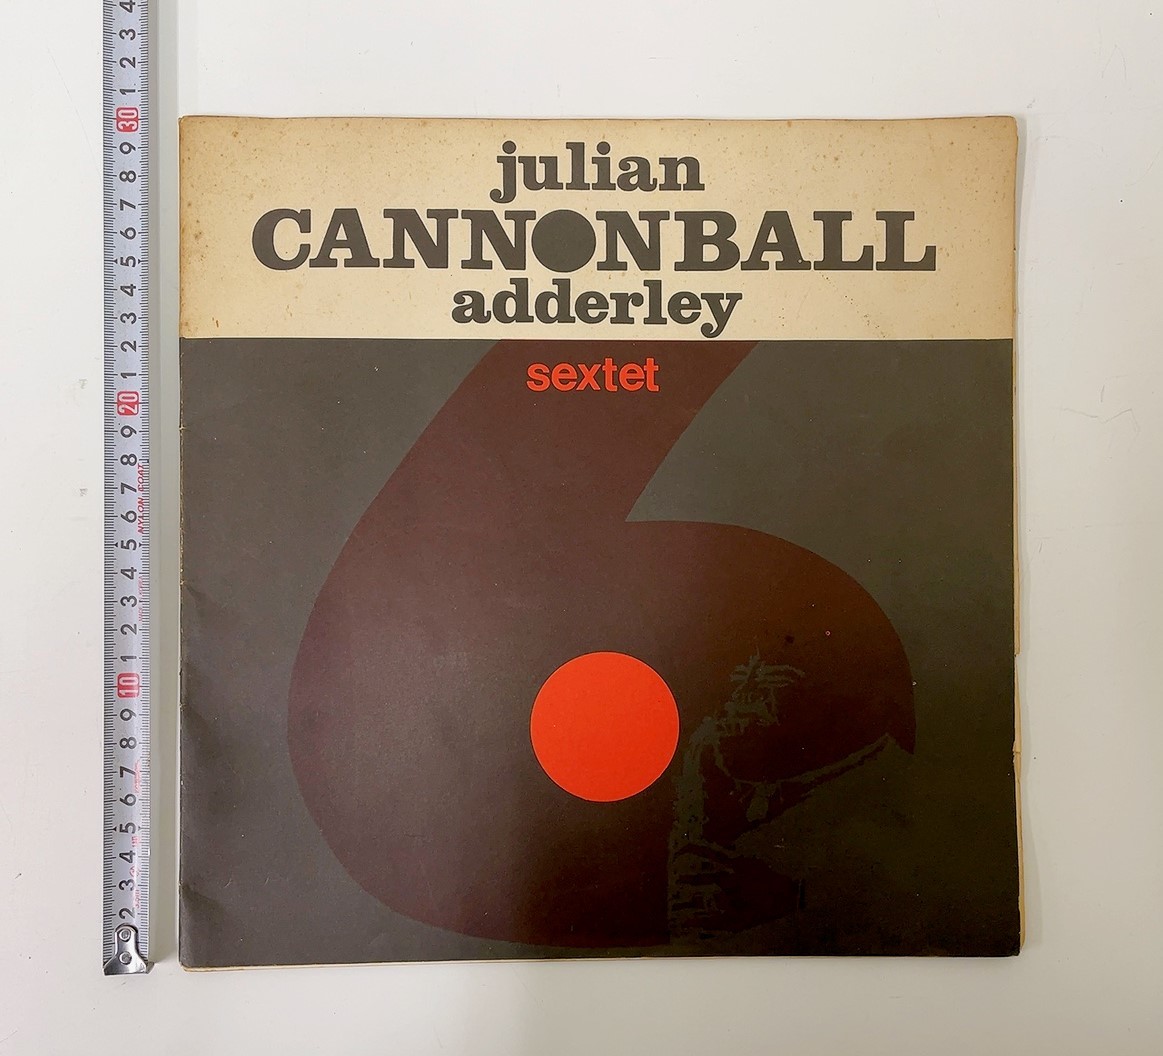  rare [1963 year Showa era 38 year [ Canon ball *ada Ray Cannonball Adderley]]JAPAN etc. pamphlet together /A52-132